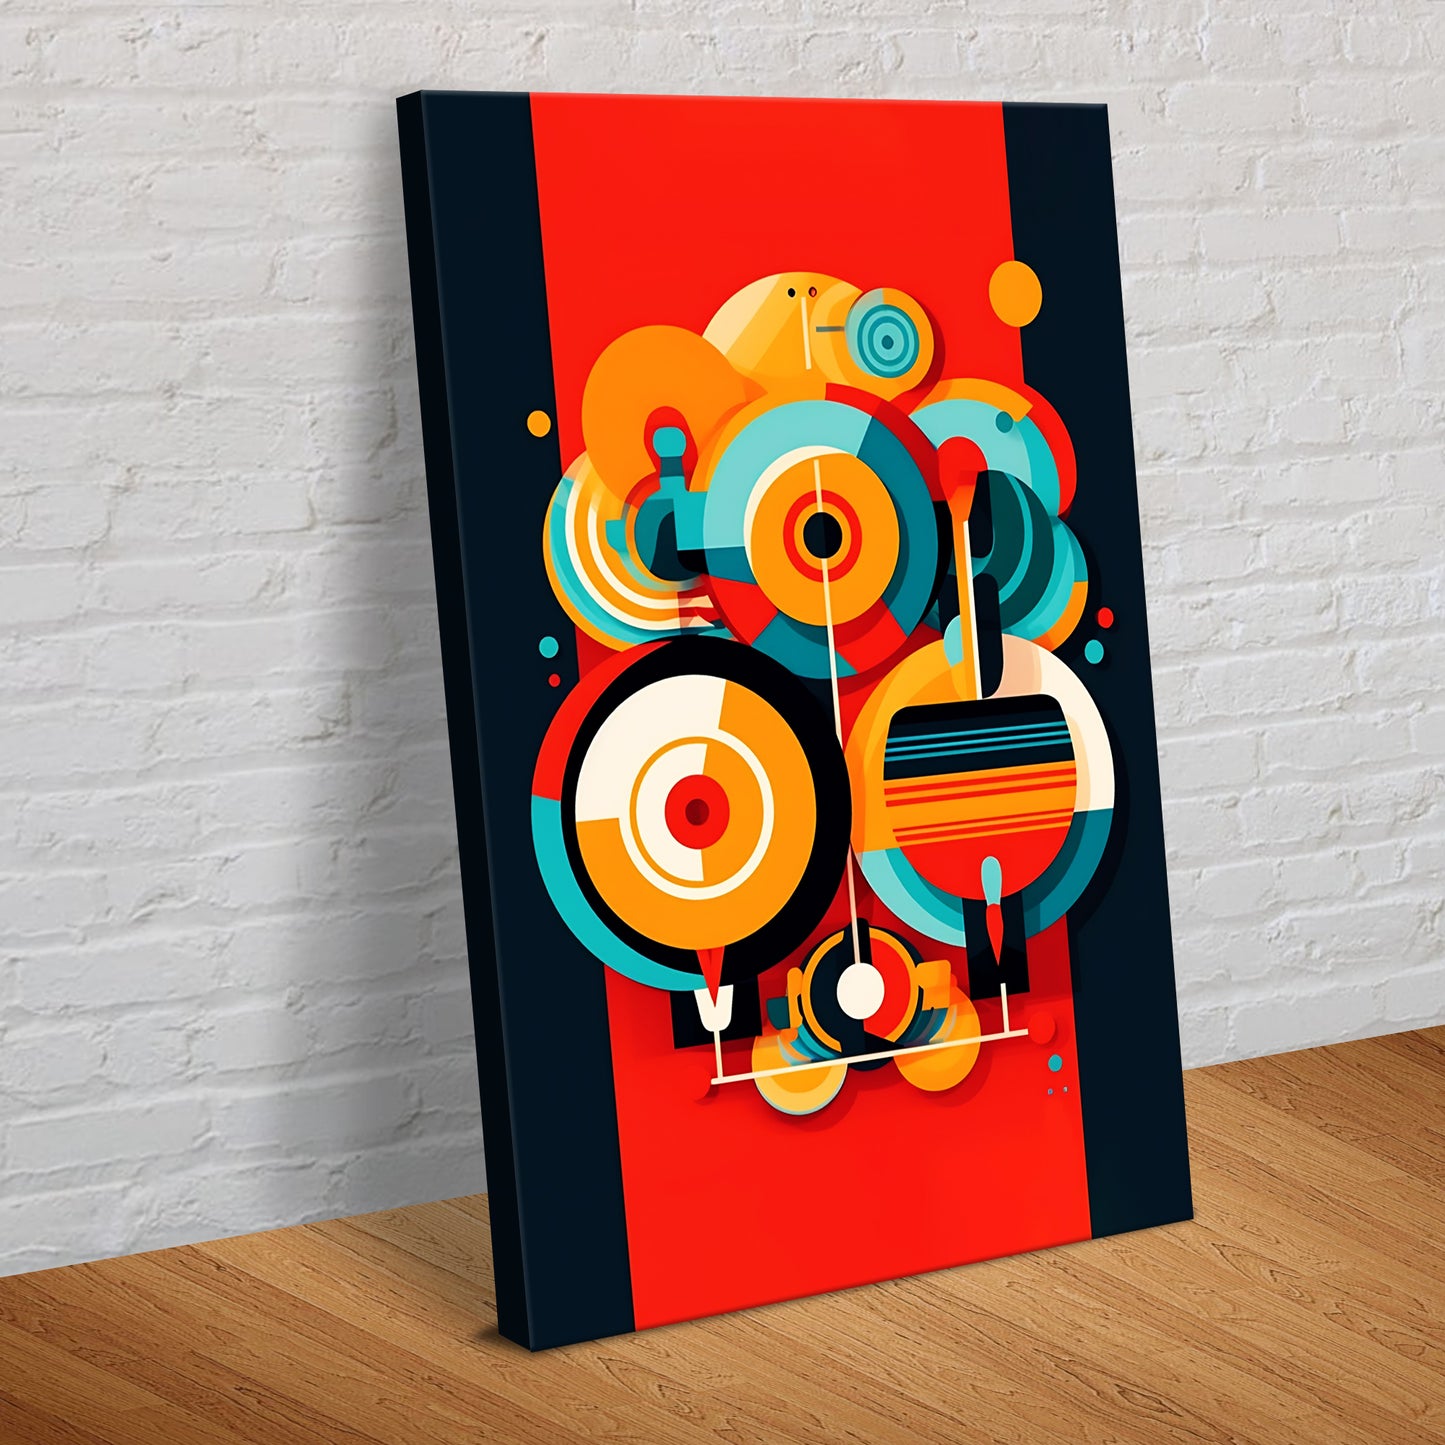 Cymbal Abstract Canvas Wall Art - Image by Tailored Canvases